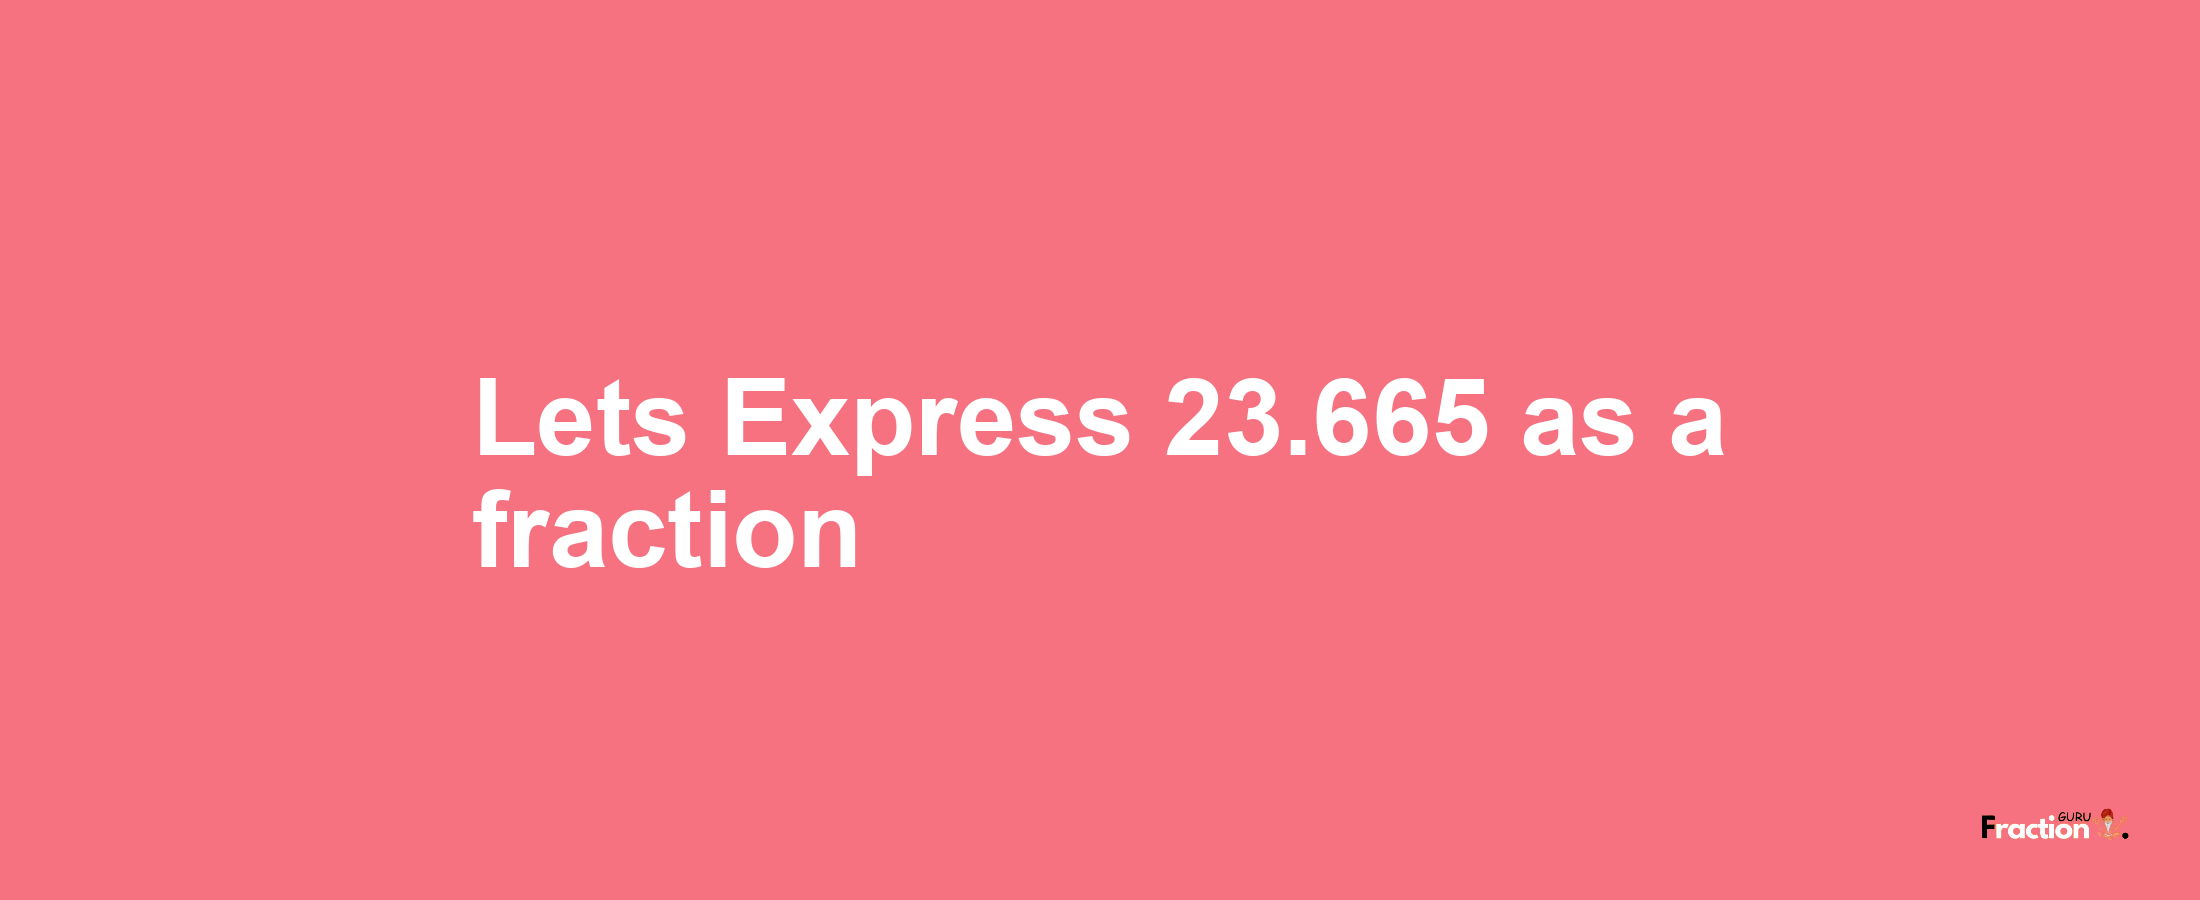 Lets Express 23.665 as afraction